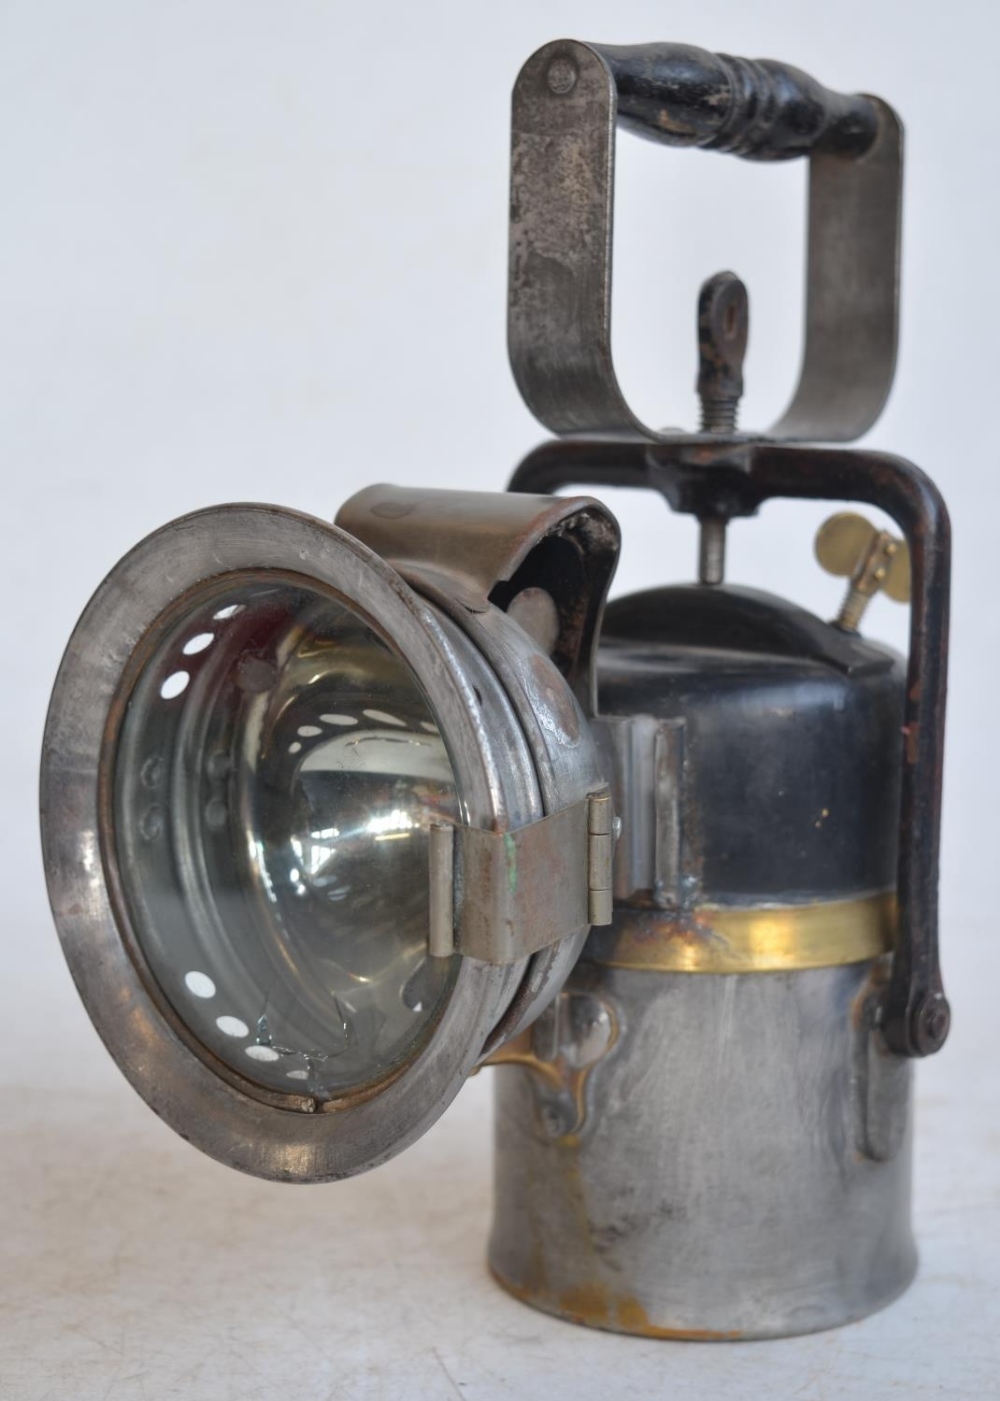 Vintage carbide railway/miners hand lamp by The Premier Lamp & Engineering Co, Leeds. Small crack to